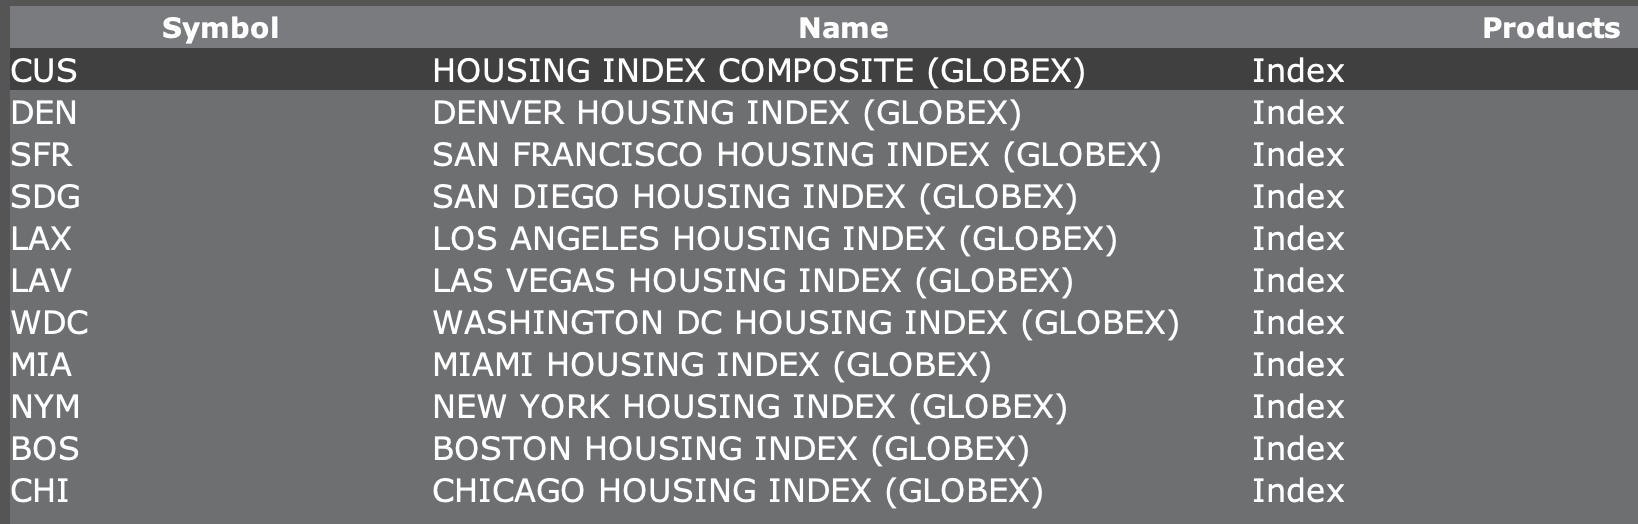 housing indexes